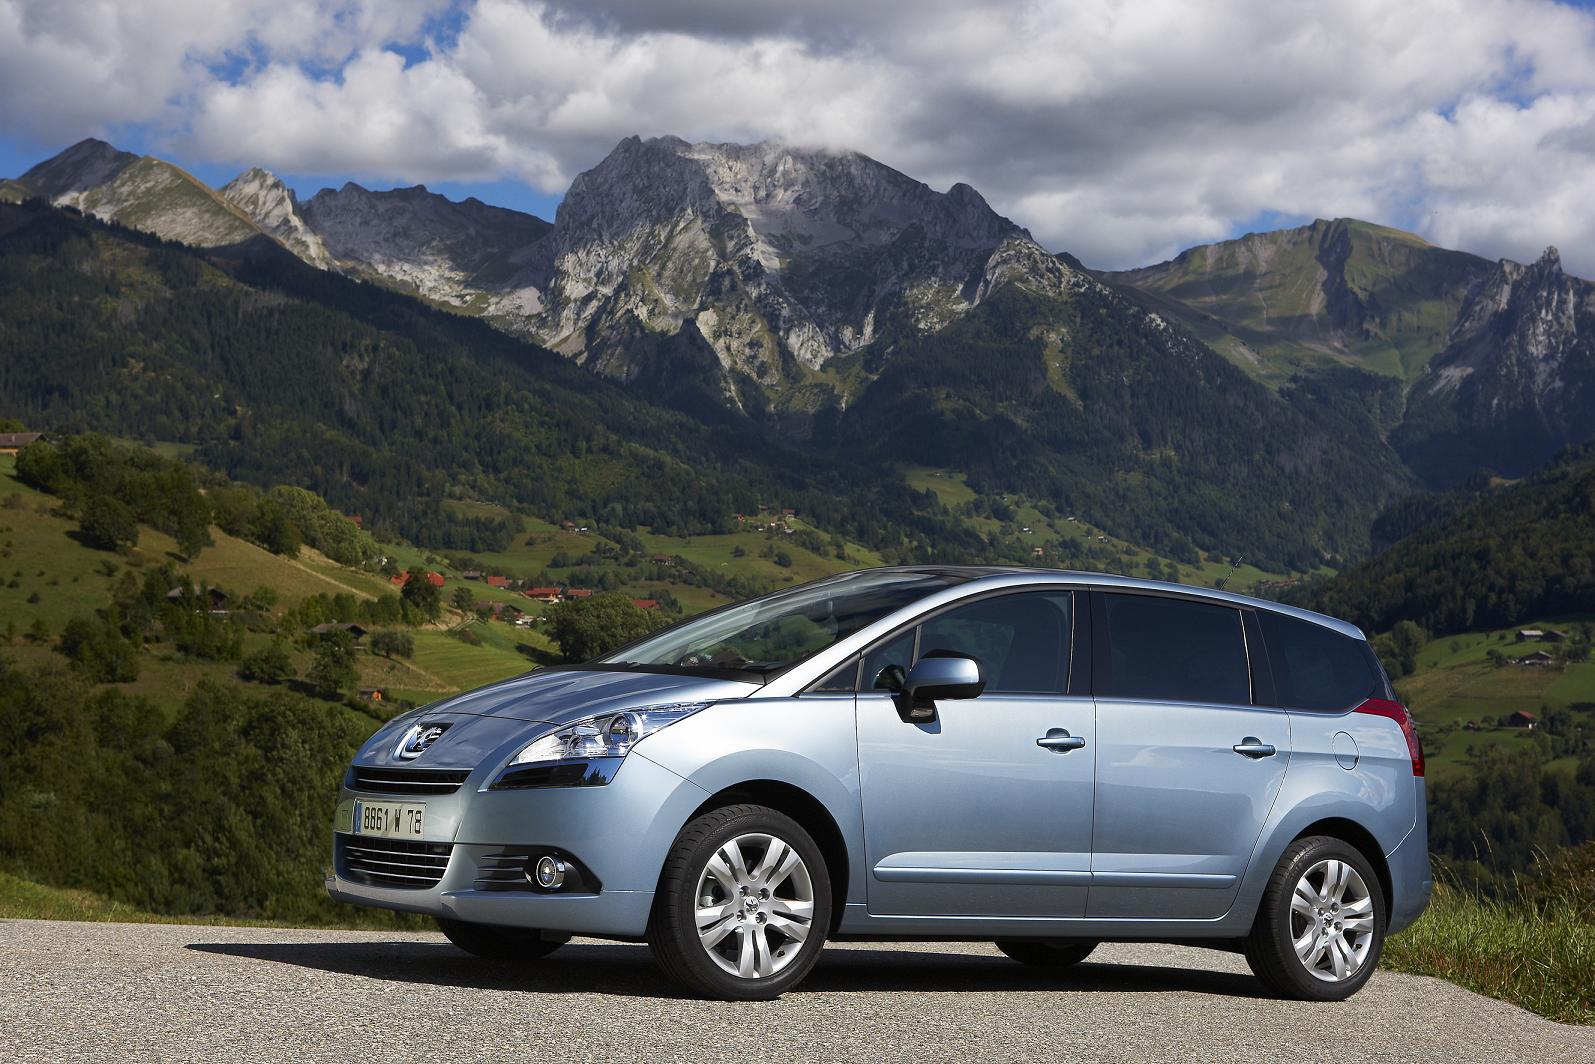 Peugeot 5008 2015: Review, Amazing Pictures and Images ...